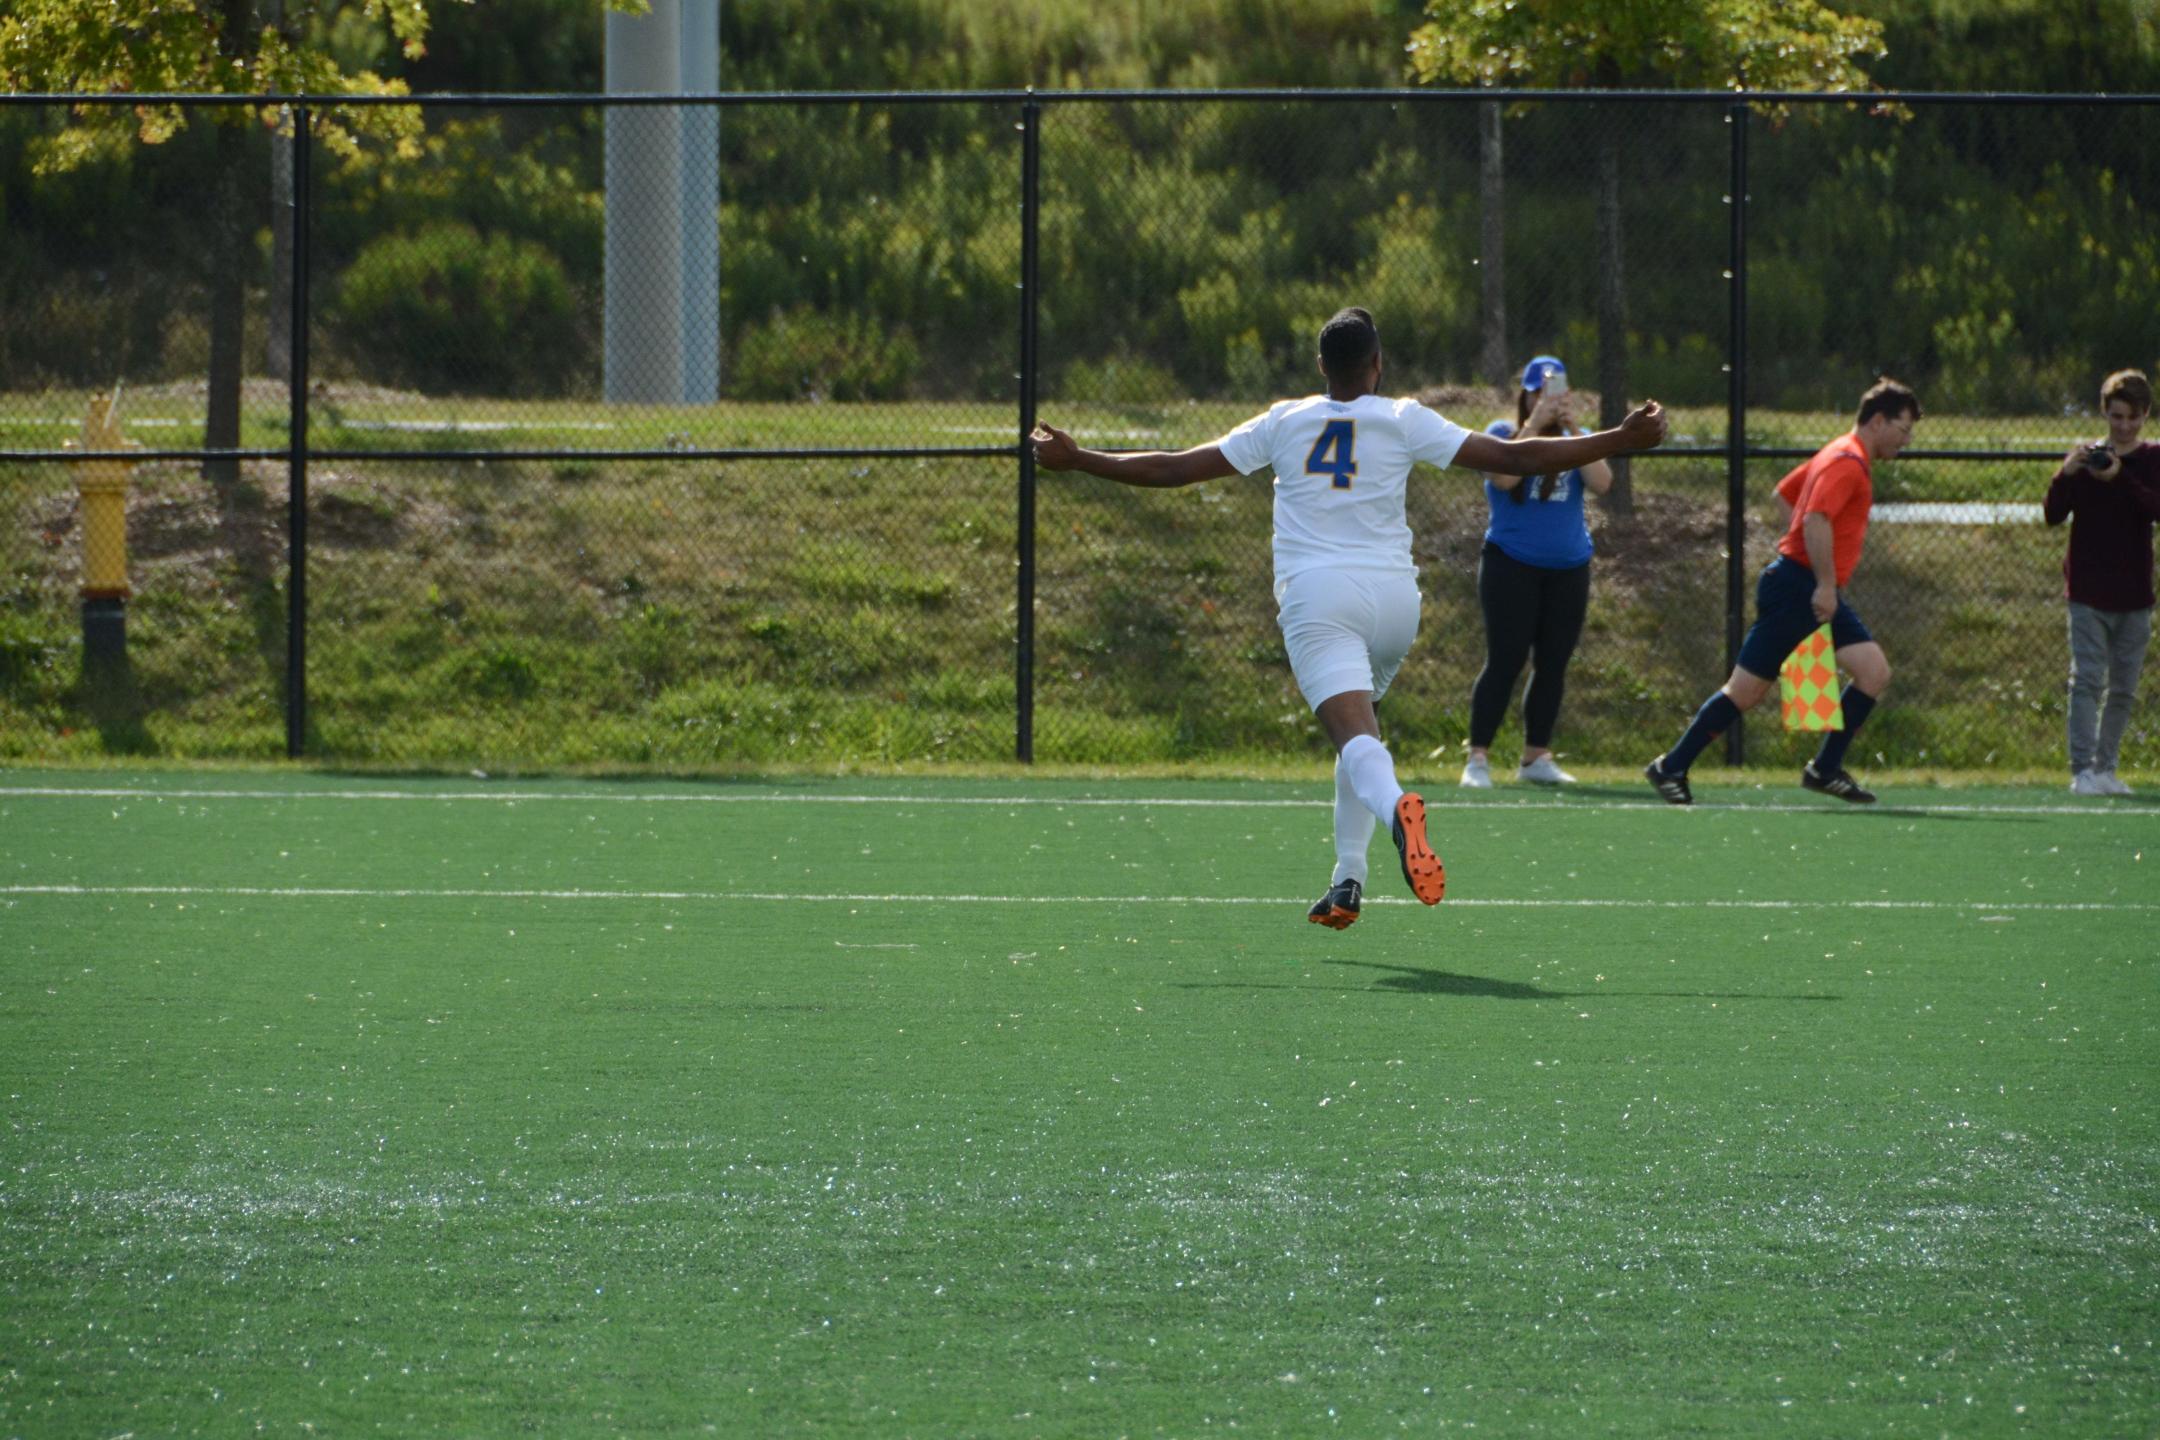 A photo of a male Ryerson student playing soccer